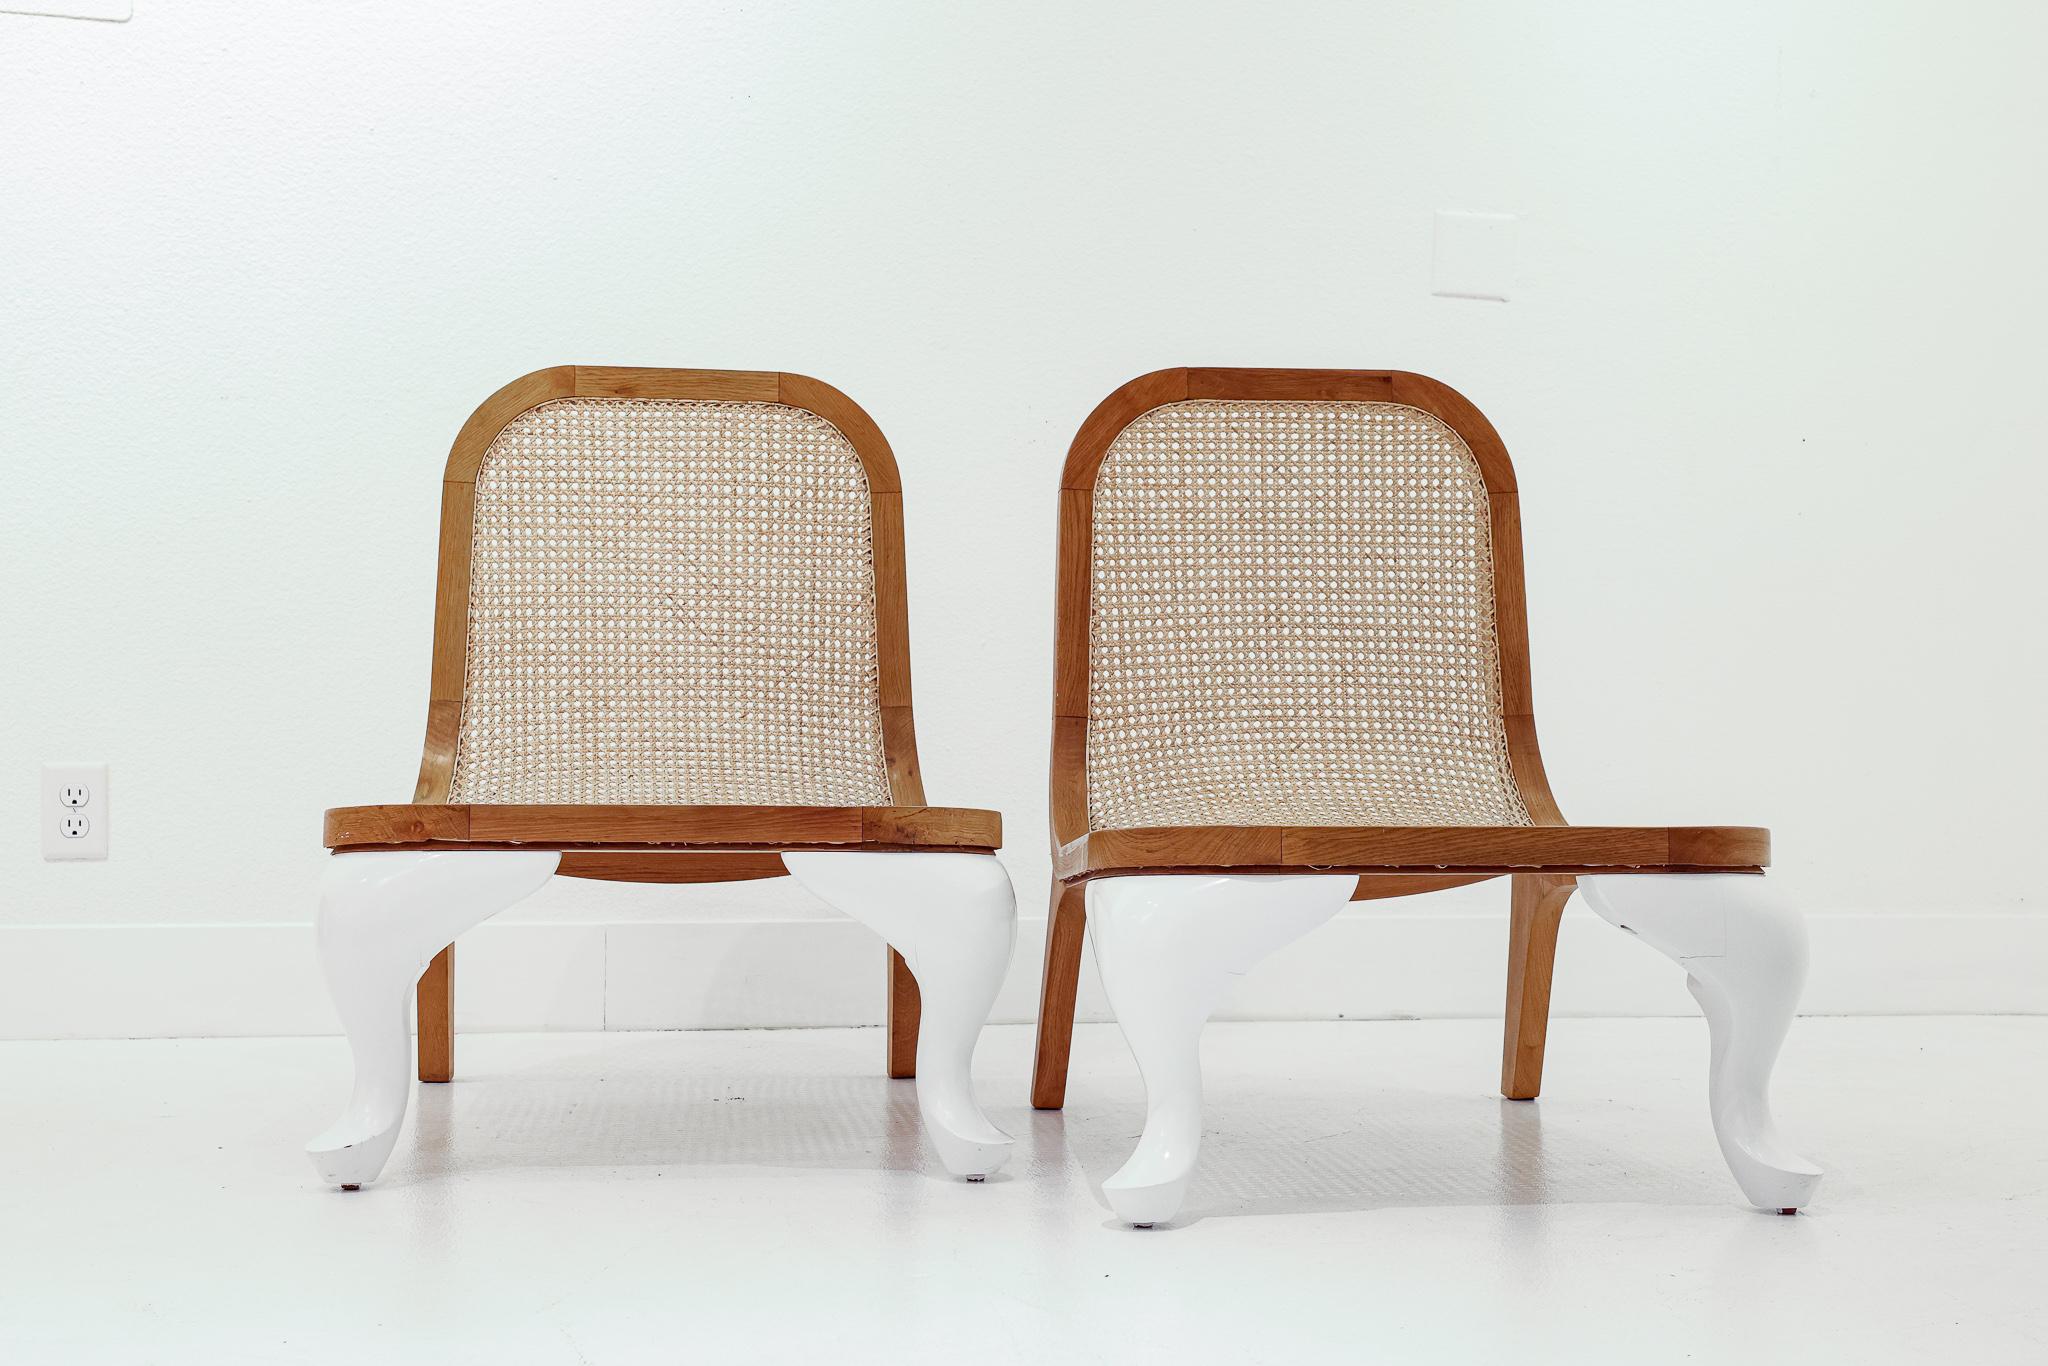 This is a unique pair of caned and lacquered slipper chairs. Their low profile, caning, and lacquered legs makes these chairs irresistible. Made of oak, the frame surrounds the seat and the back rest; the rear legs have a horizontal support and are